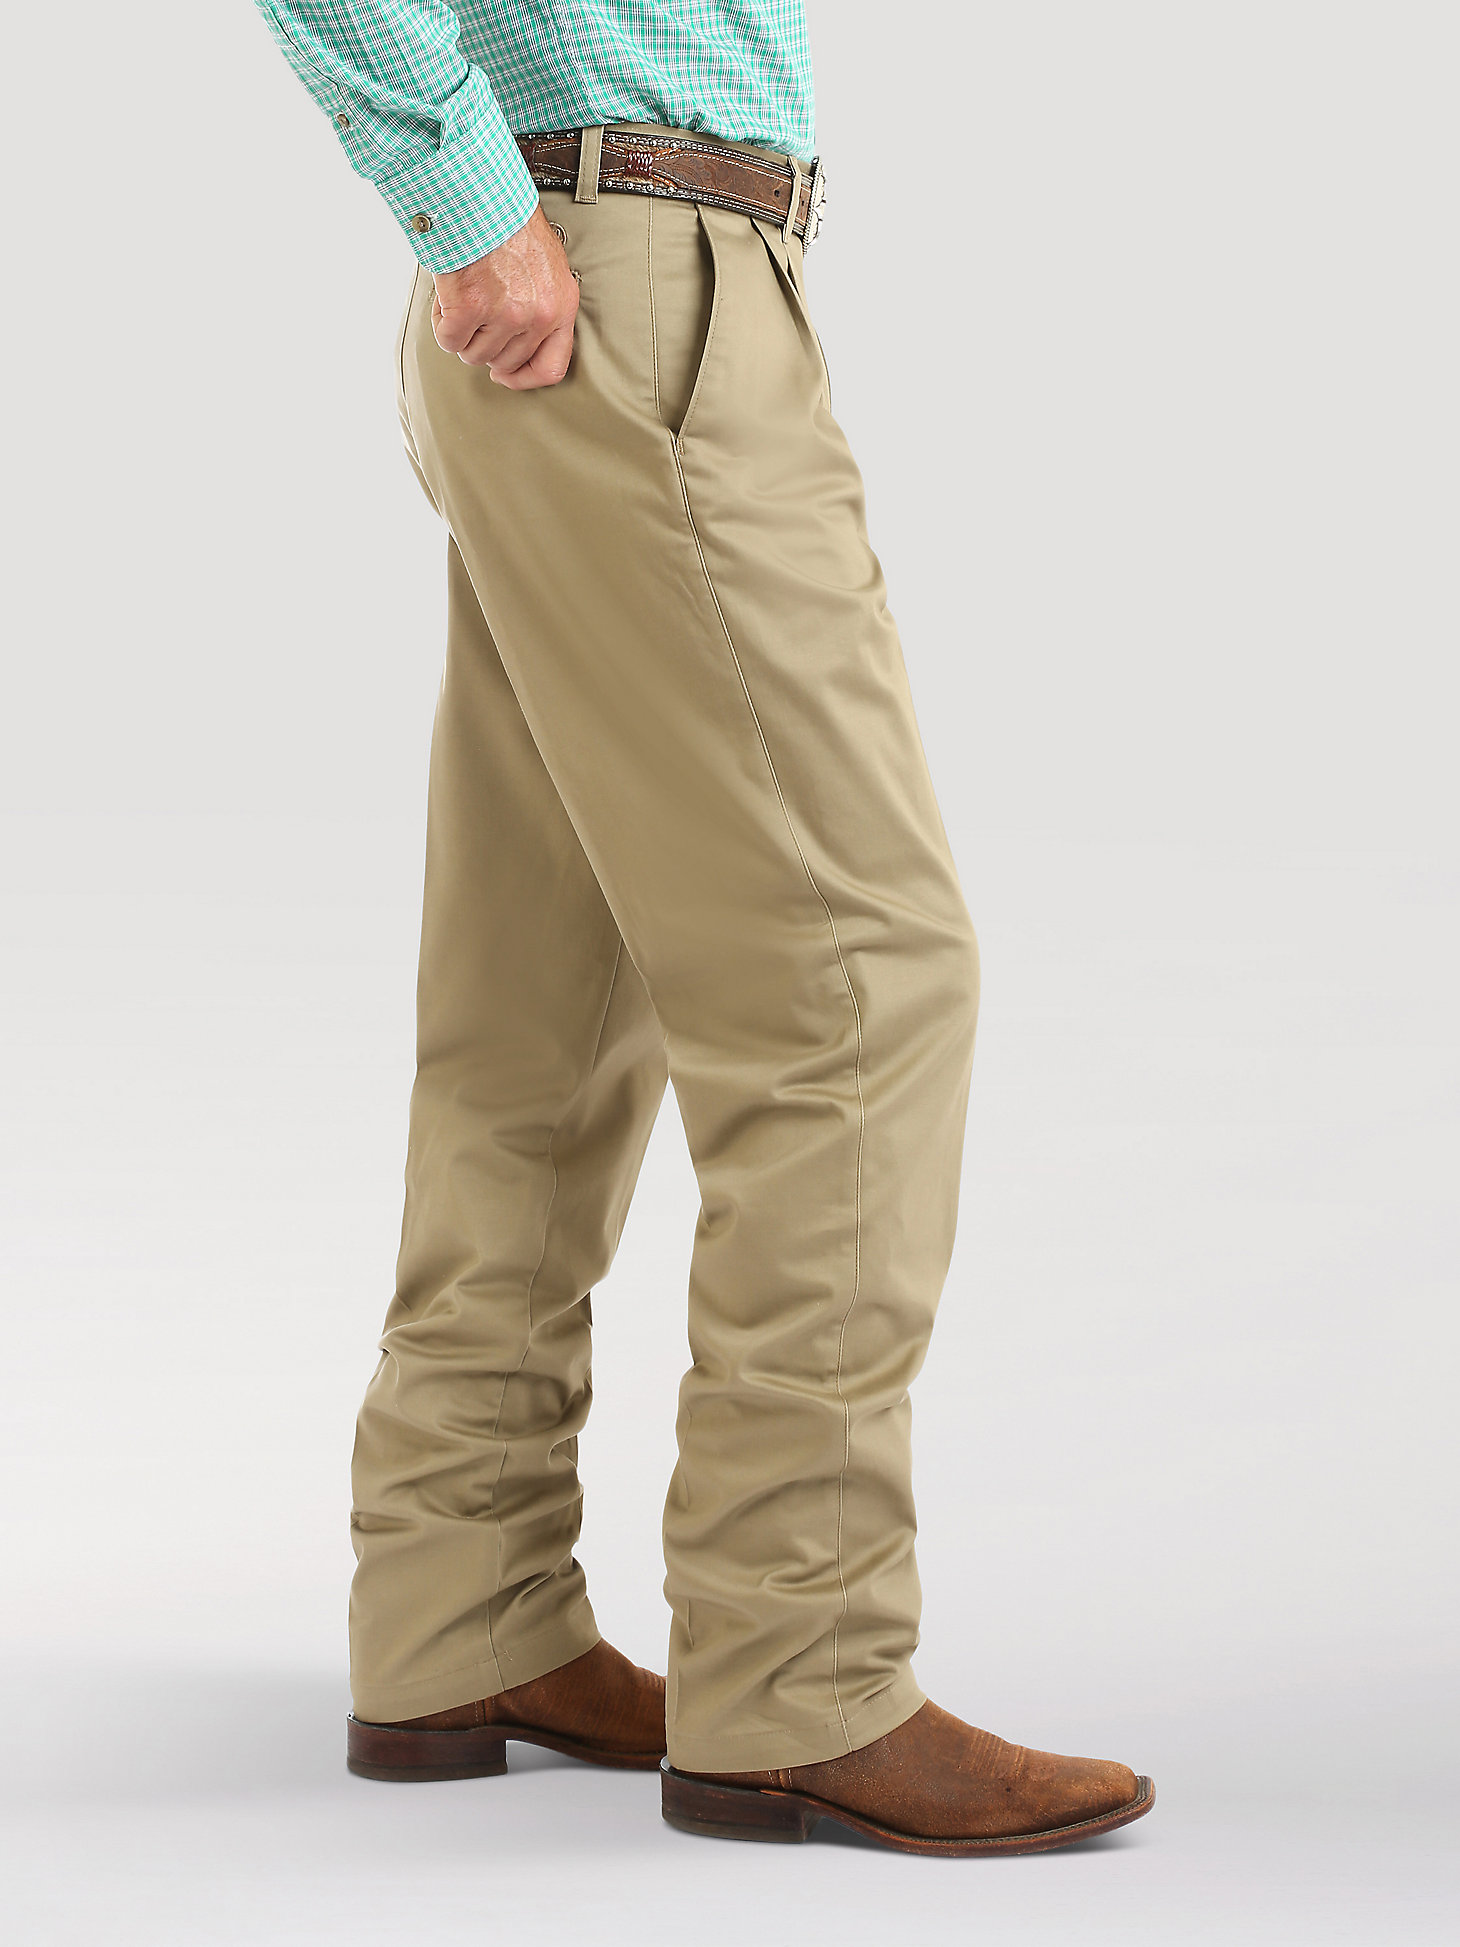 Men's Wrangler Casuals® Pleated Front Relaxed Fit Pants | Men's PANTS ...